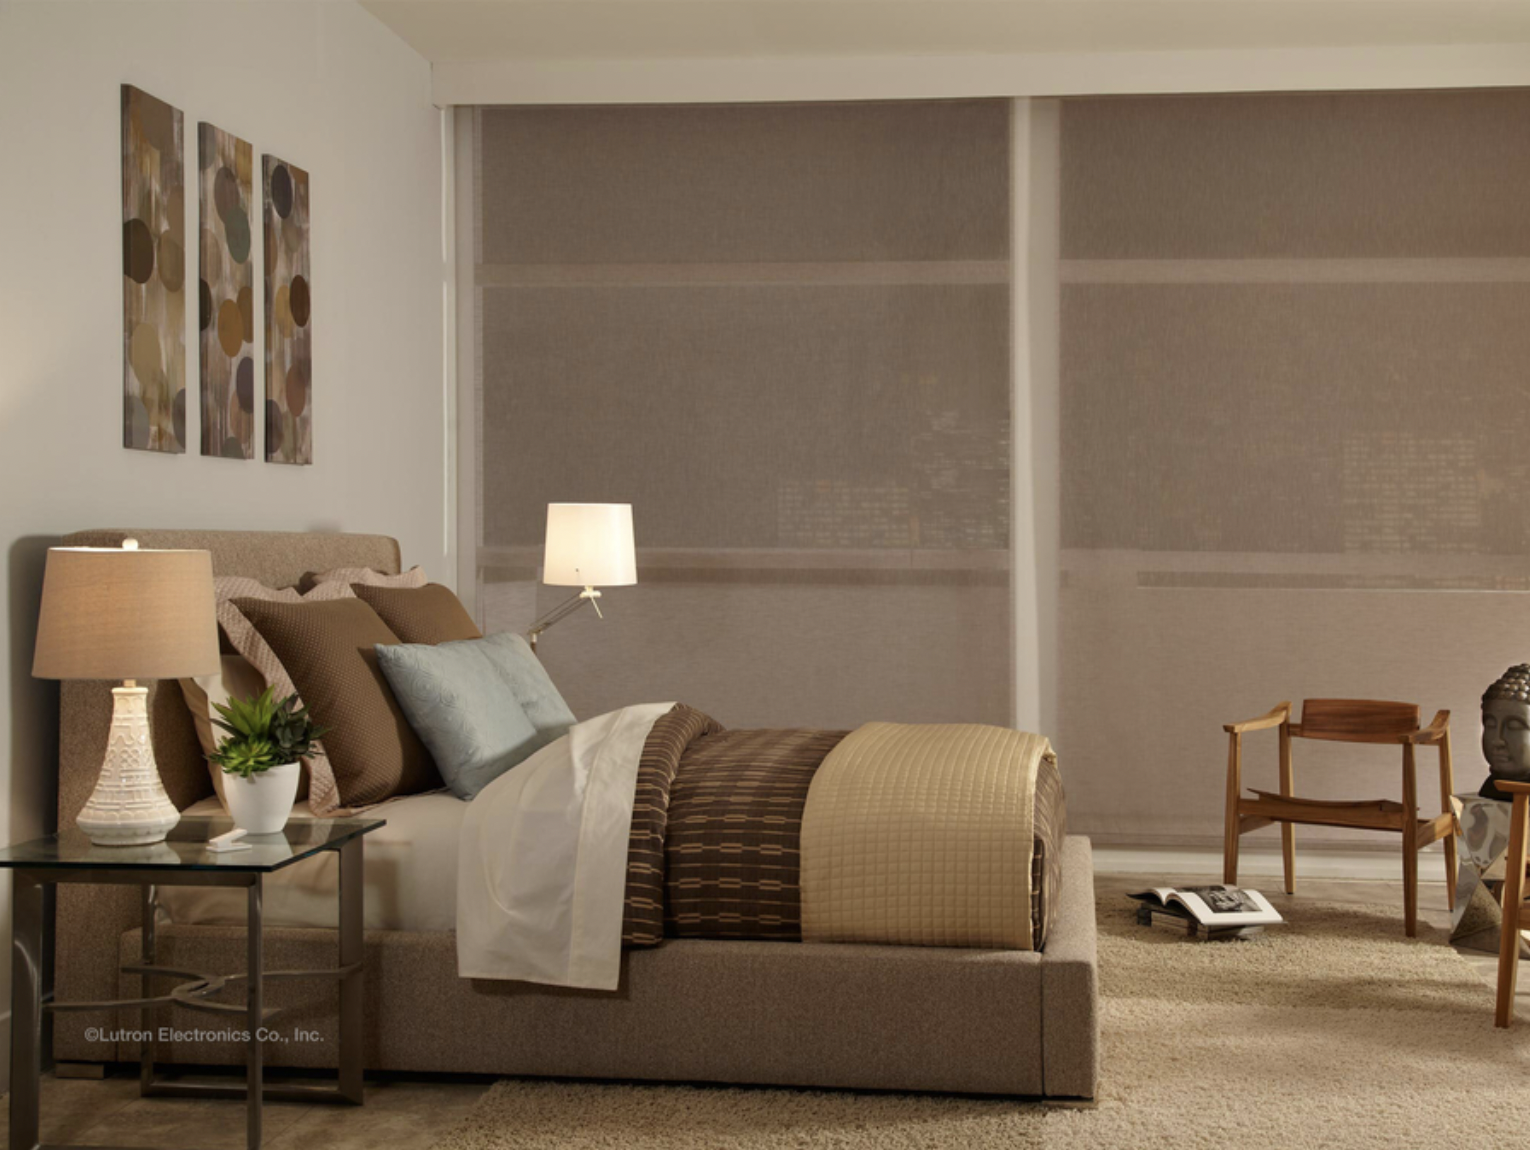 Stay Comfortable in Every Season with Motorized Window Shades